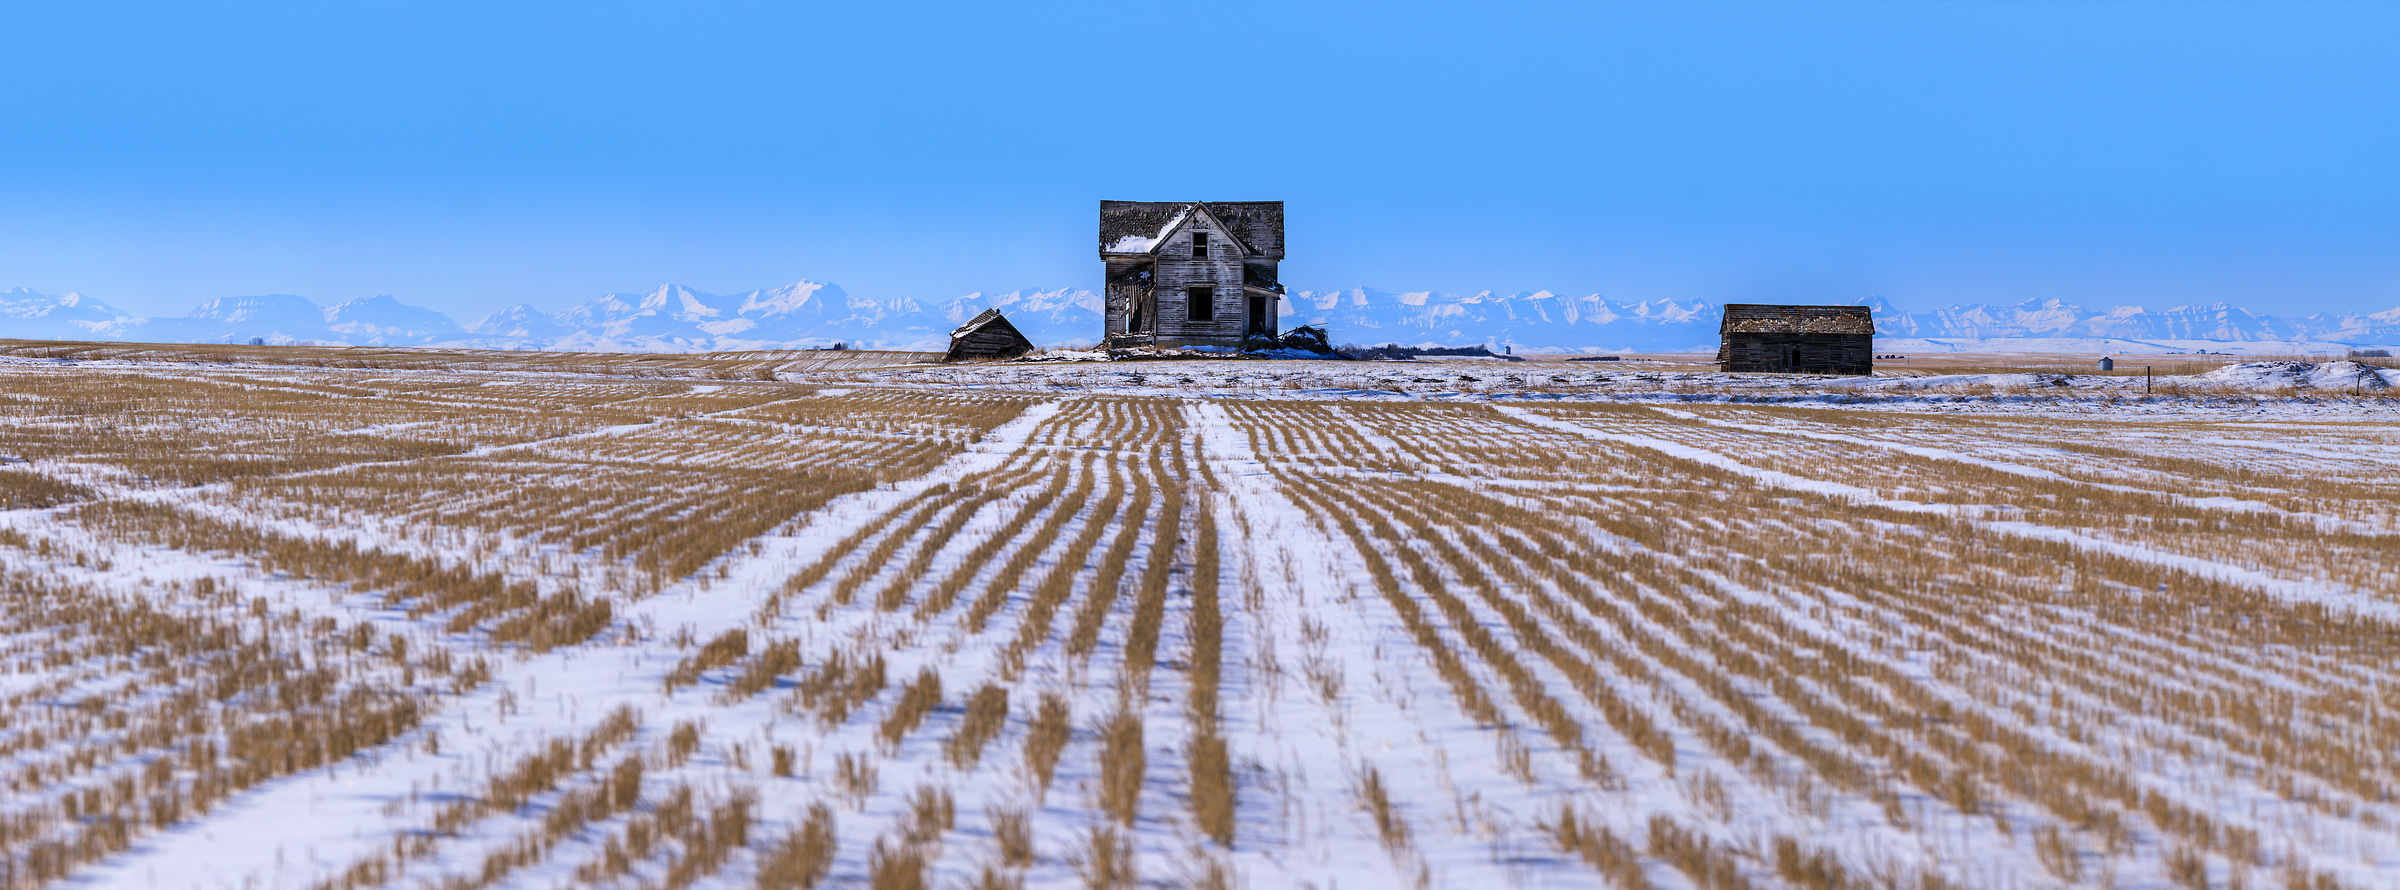 1,052 megapixels! A very high resolution, large-format VAST photo print of an abandoned house in a field on a prairie; landscape photograph created by Scott Dimond in Foothills County, Alberta, Canada.